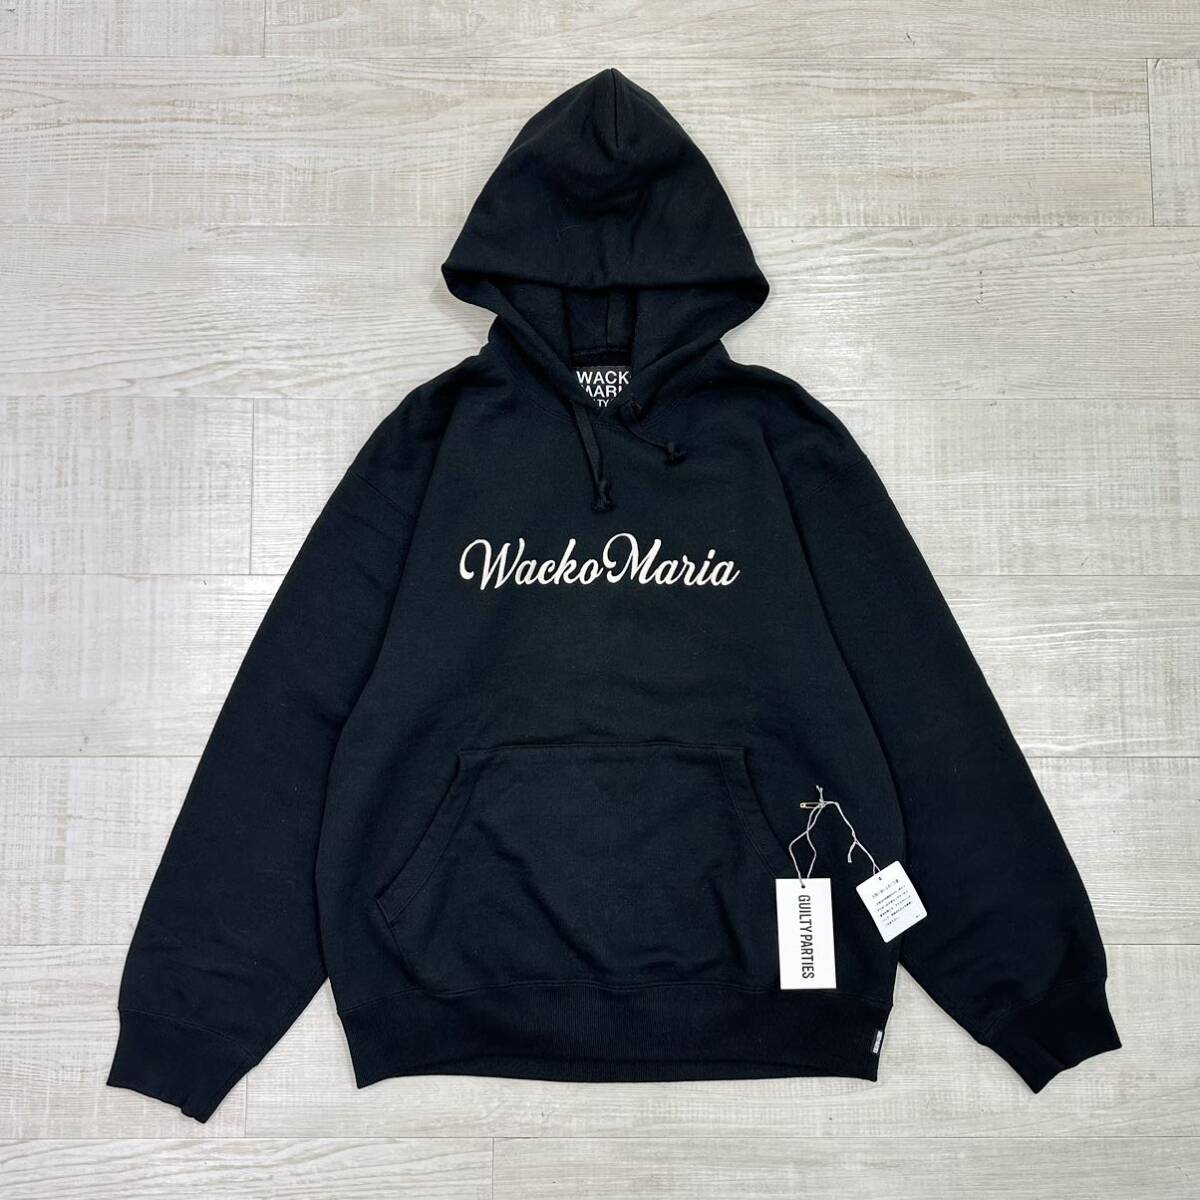 23aw 2023 WACKO MARIA Wacko Maria HEAVY WEIGHT PULL OVER HOODED SWEAT SHIRT 23FW-WMC-SS01 Logo embroidery f- dead Parker size L